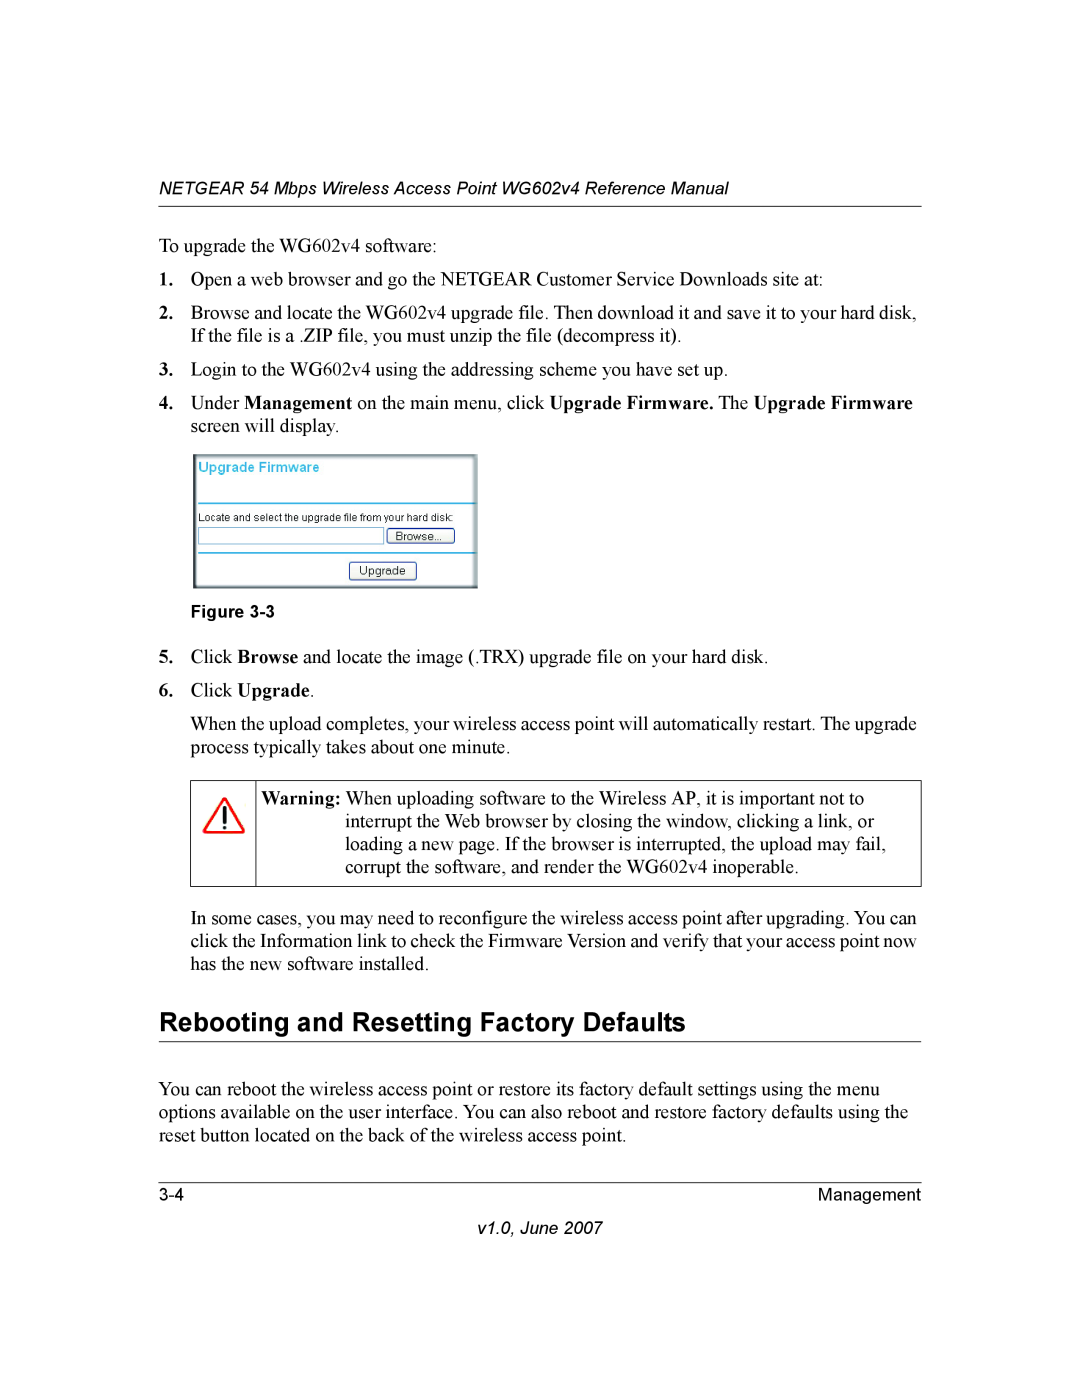 NETGEAR WG602V4 manual Rebooting and Resetting Factory Defaults 